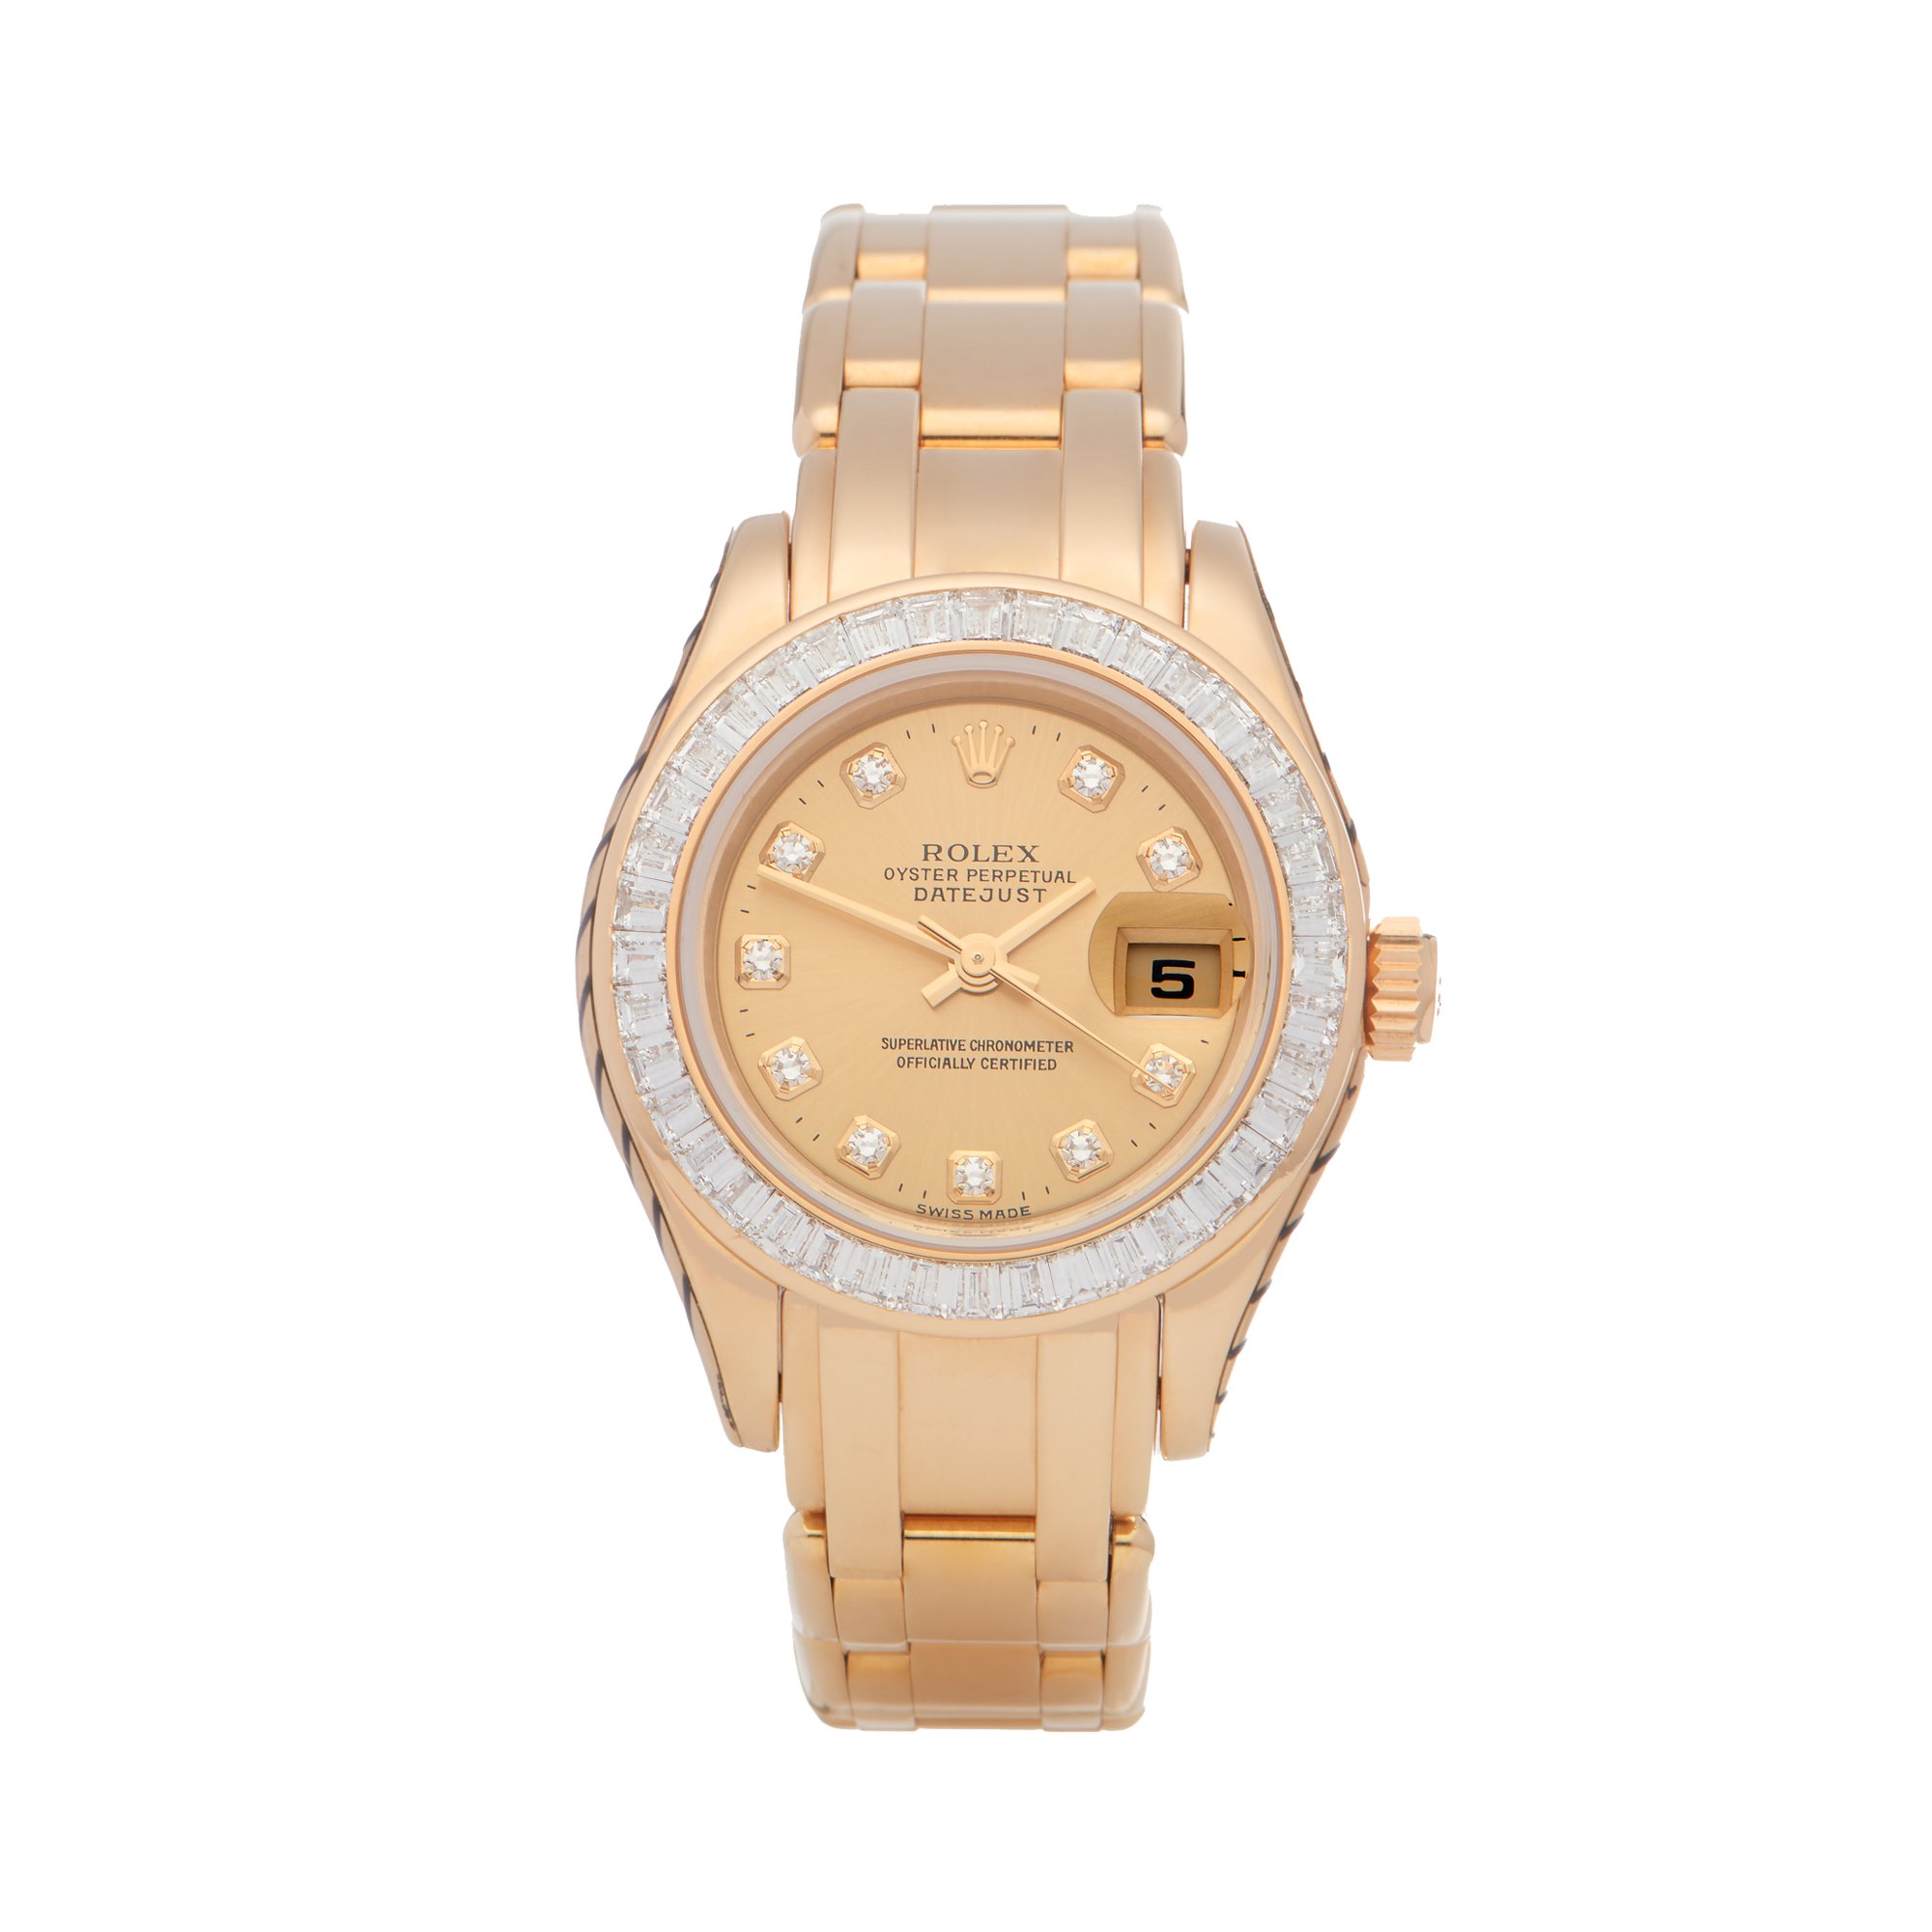 Rolex Datejust Pearlmaster 18K Yellow Gold 80308